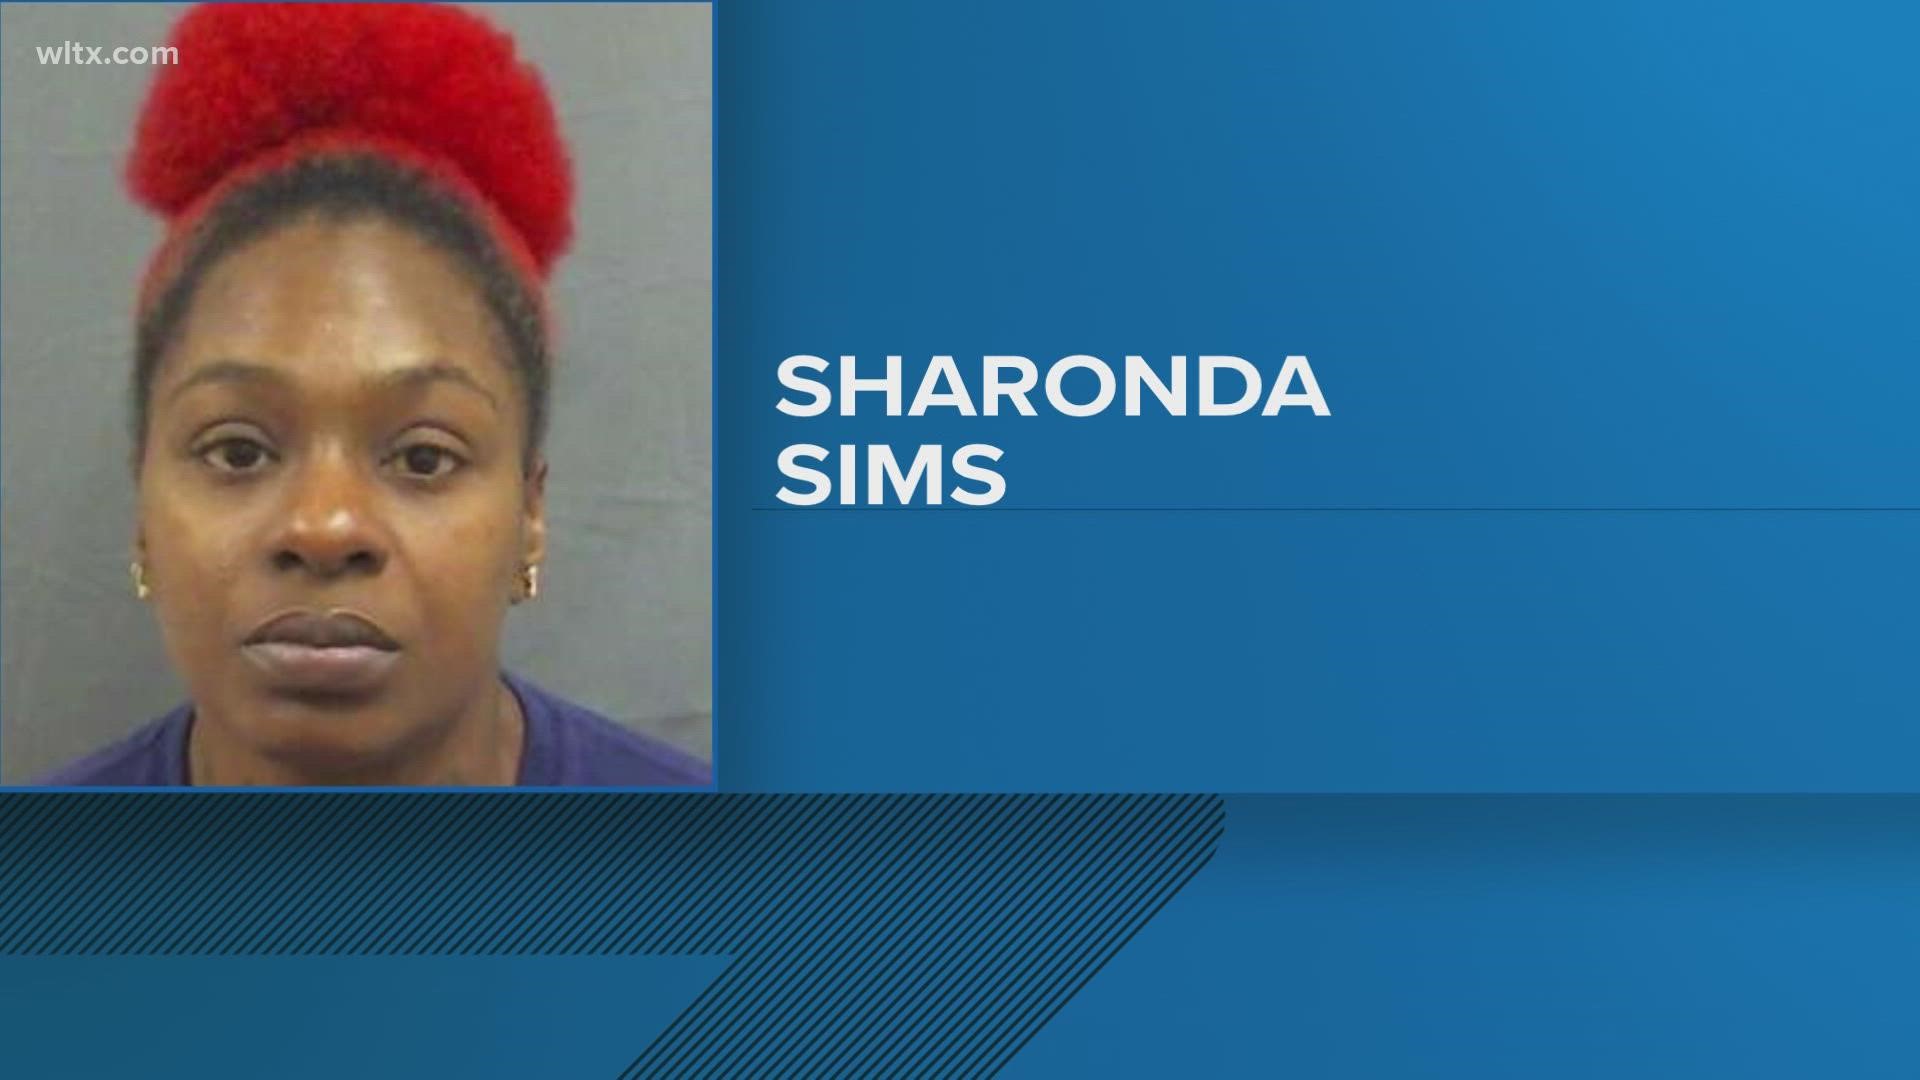 Sharonda Sims, 40, was found dead by police on Drayton Street in Newberry.